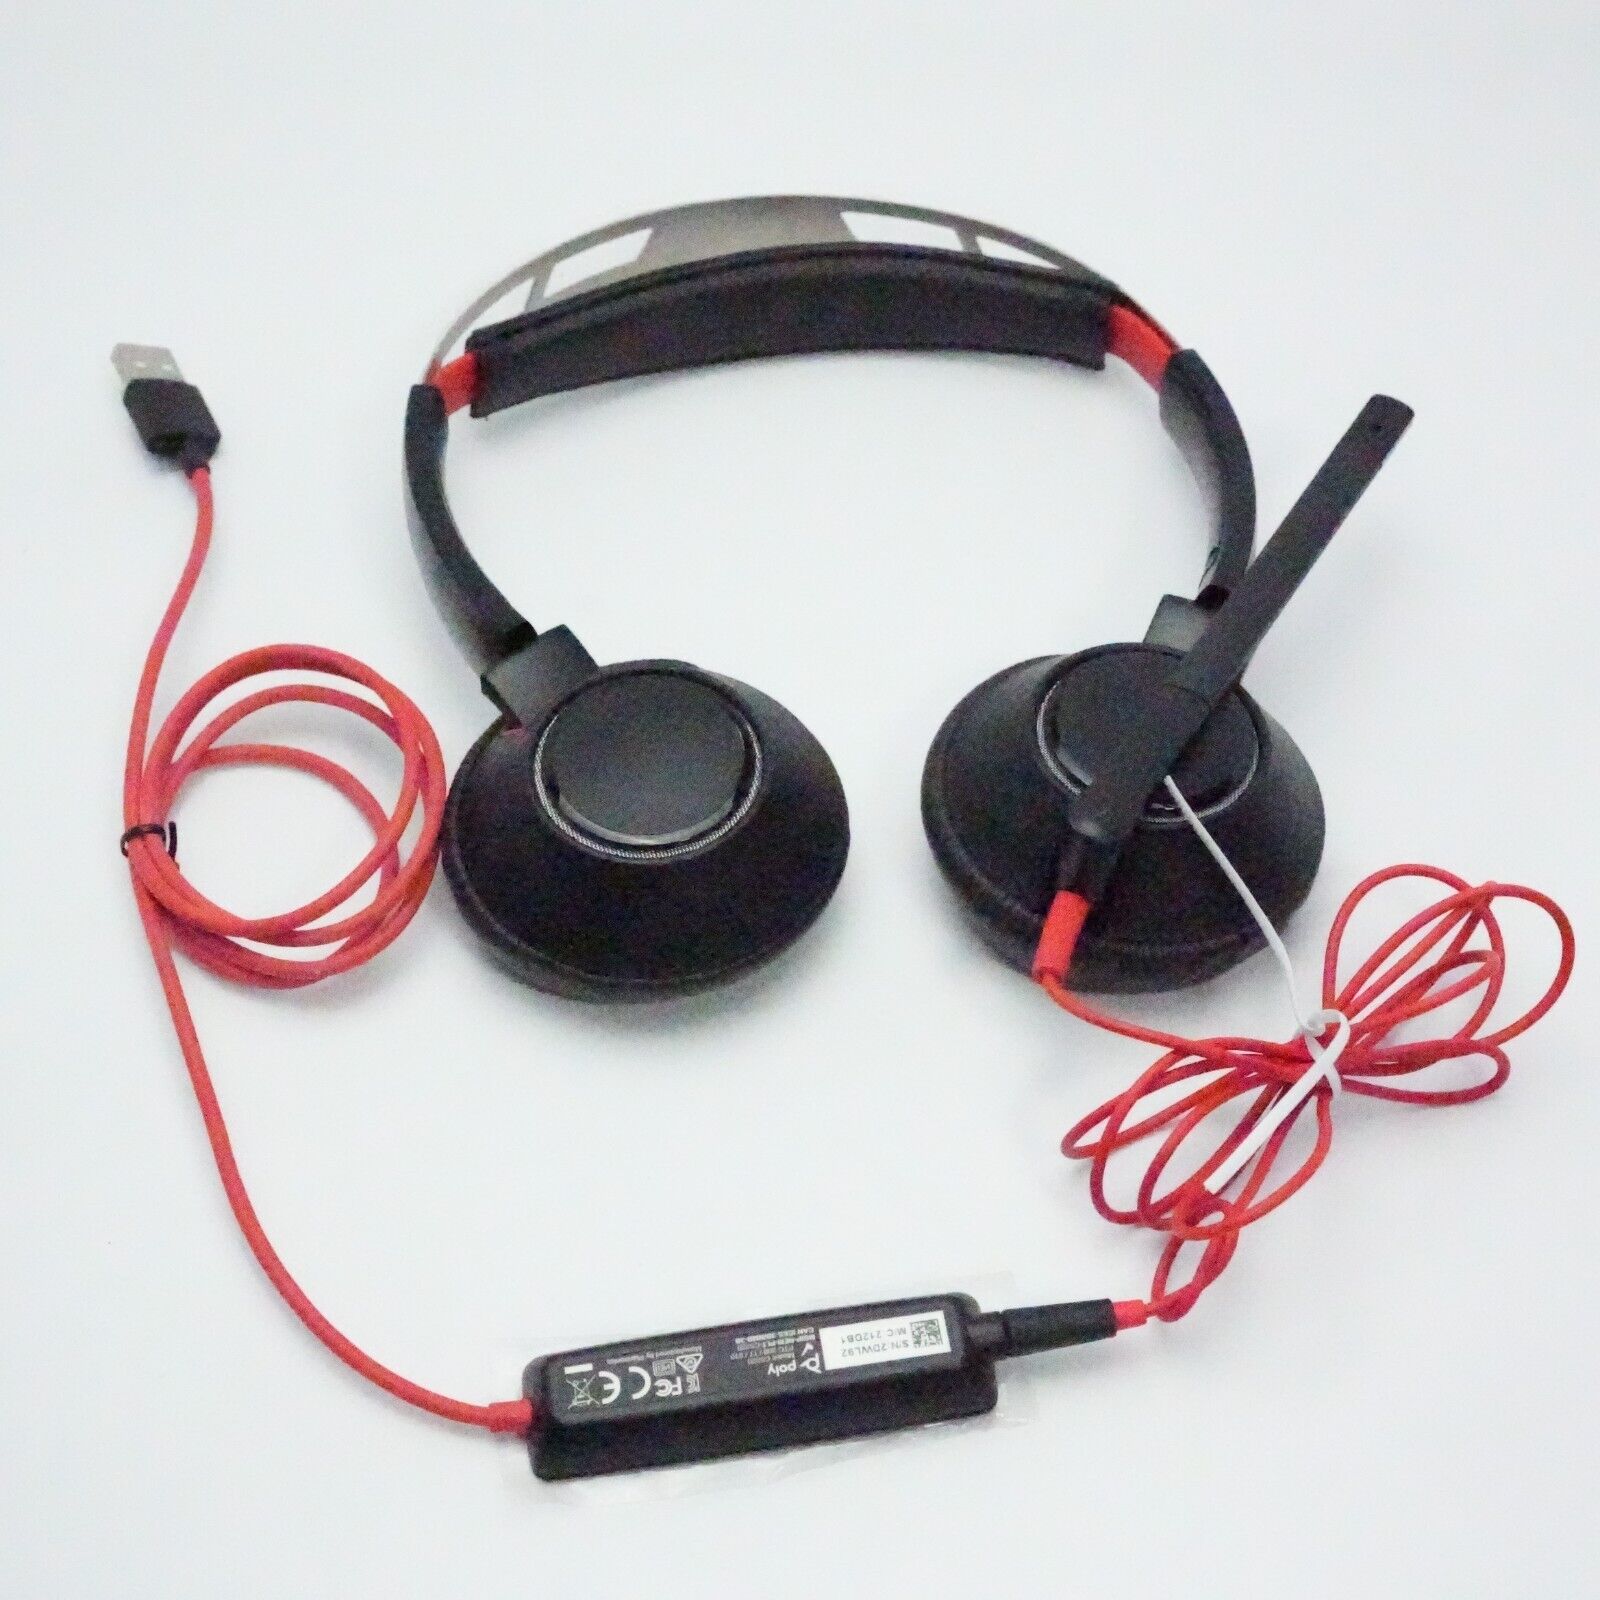 Poly Blackwire C5220 Wired Noise Canceling On The Ear Stereo Headphones w Remote